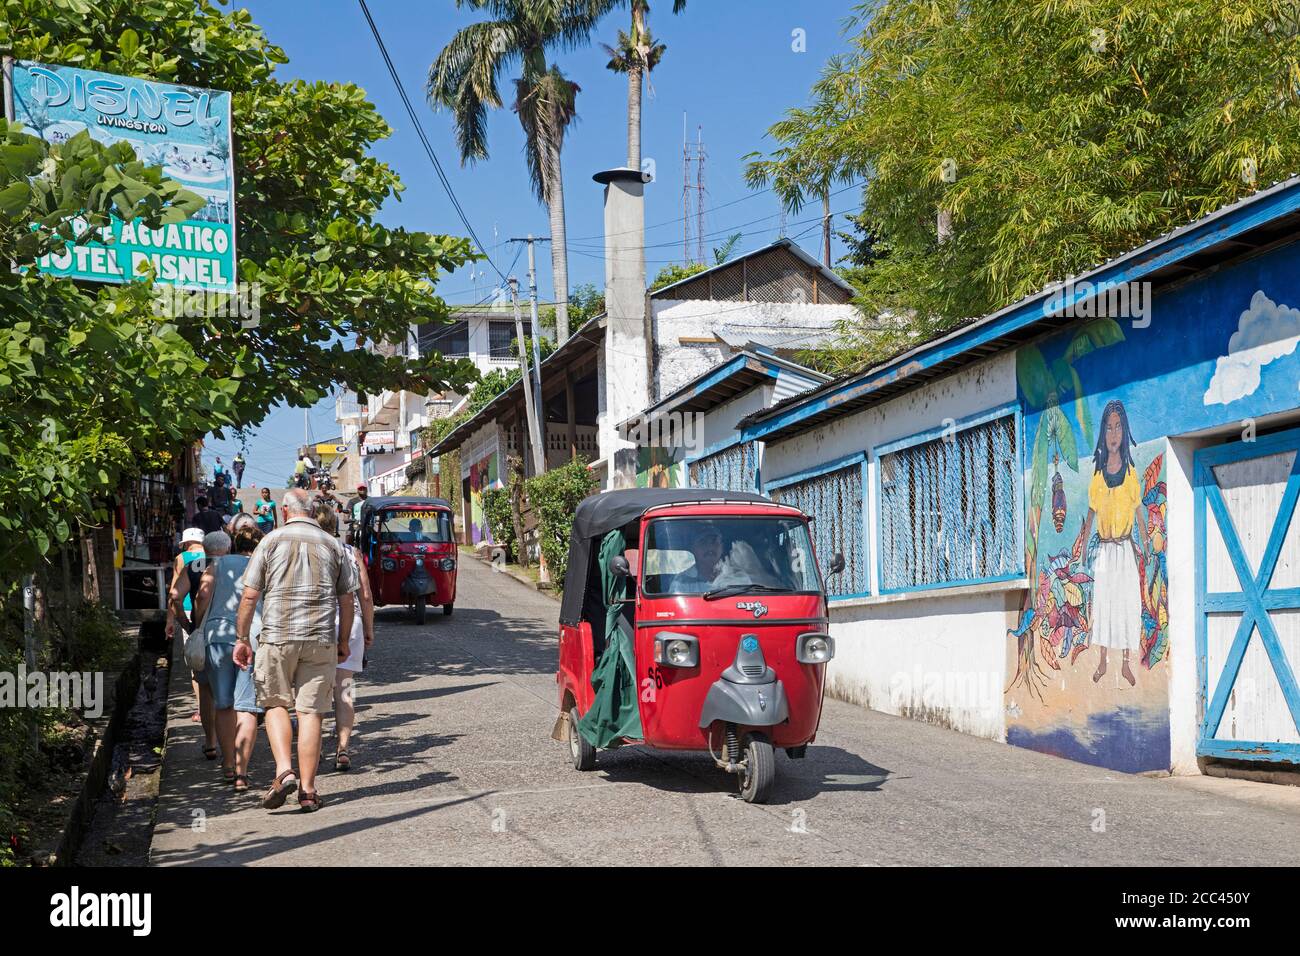 Western elderly tourists and red coloured tuk-tuks / mototaxis in street in the town Livingston, Izabal Department, Guatemala, Central America Stock Photo